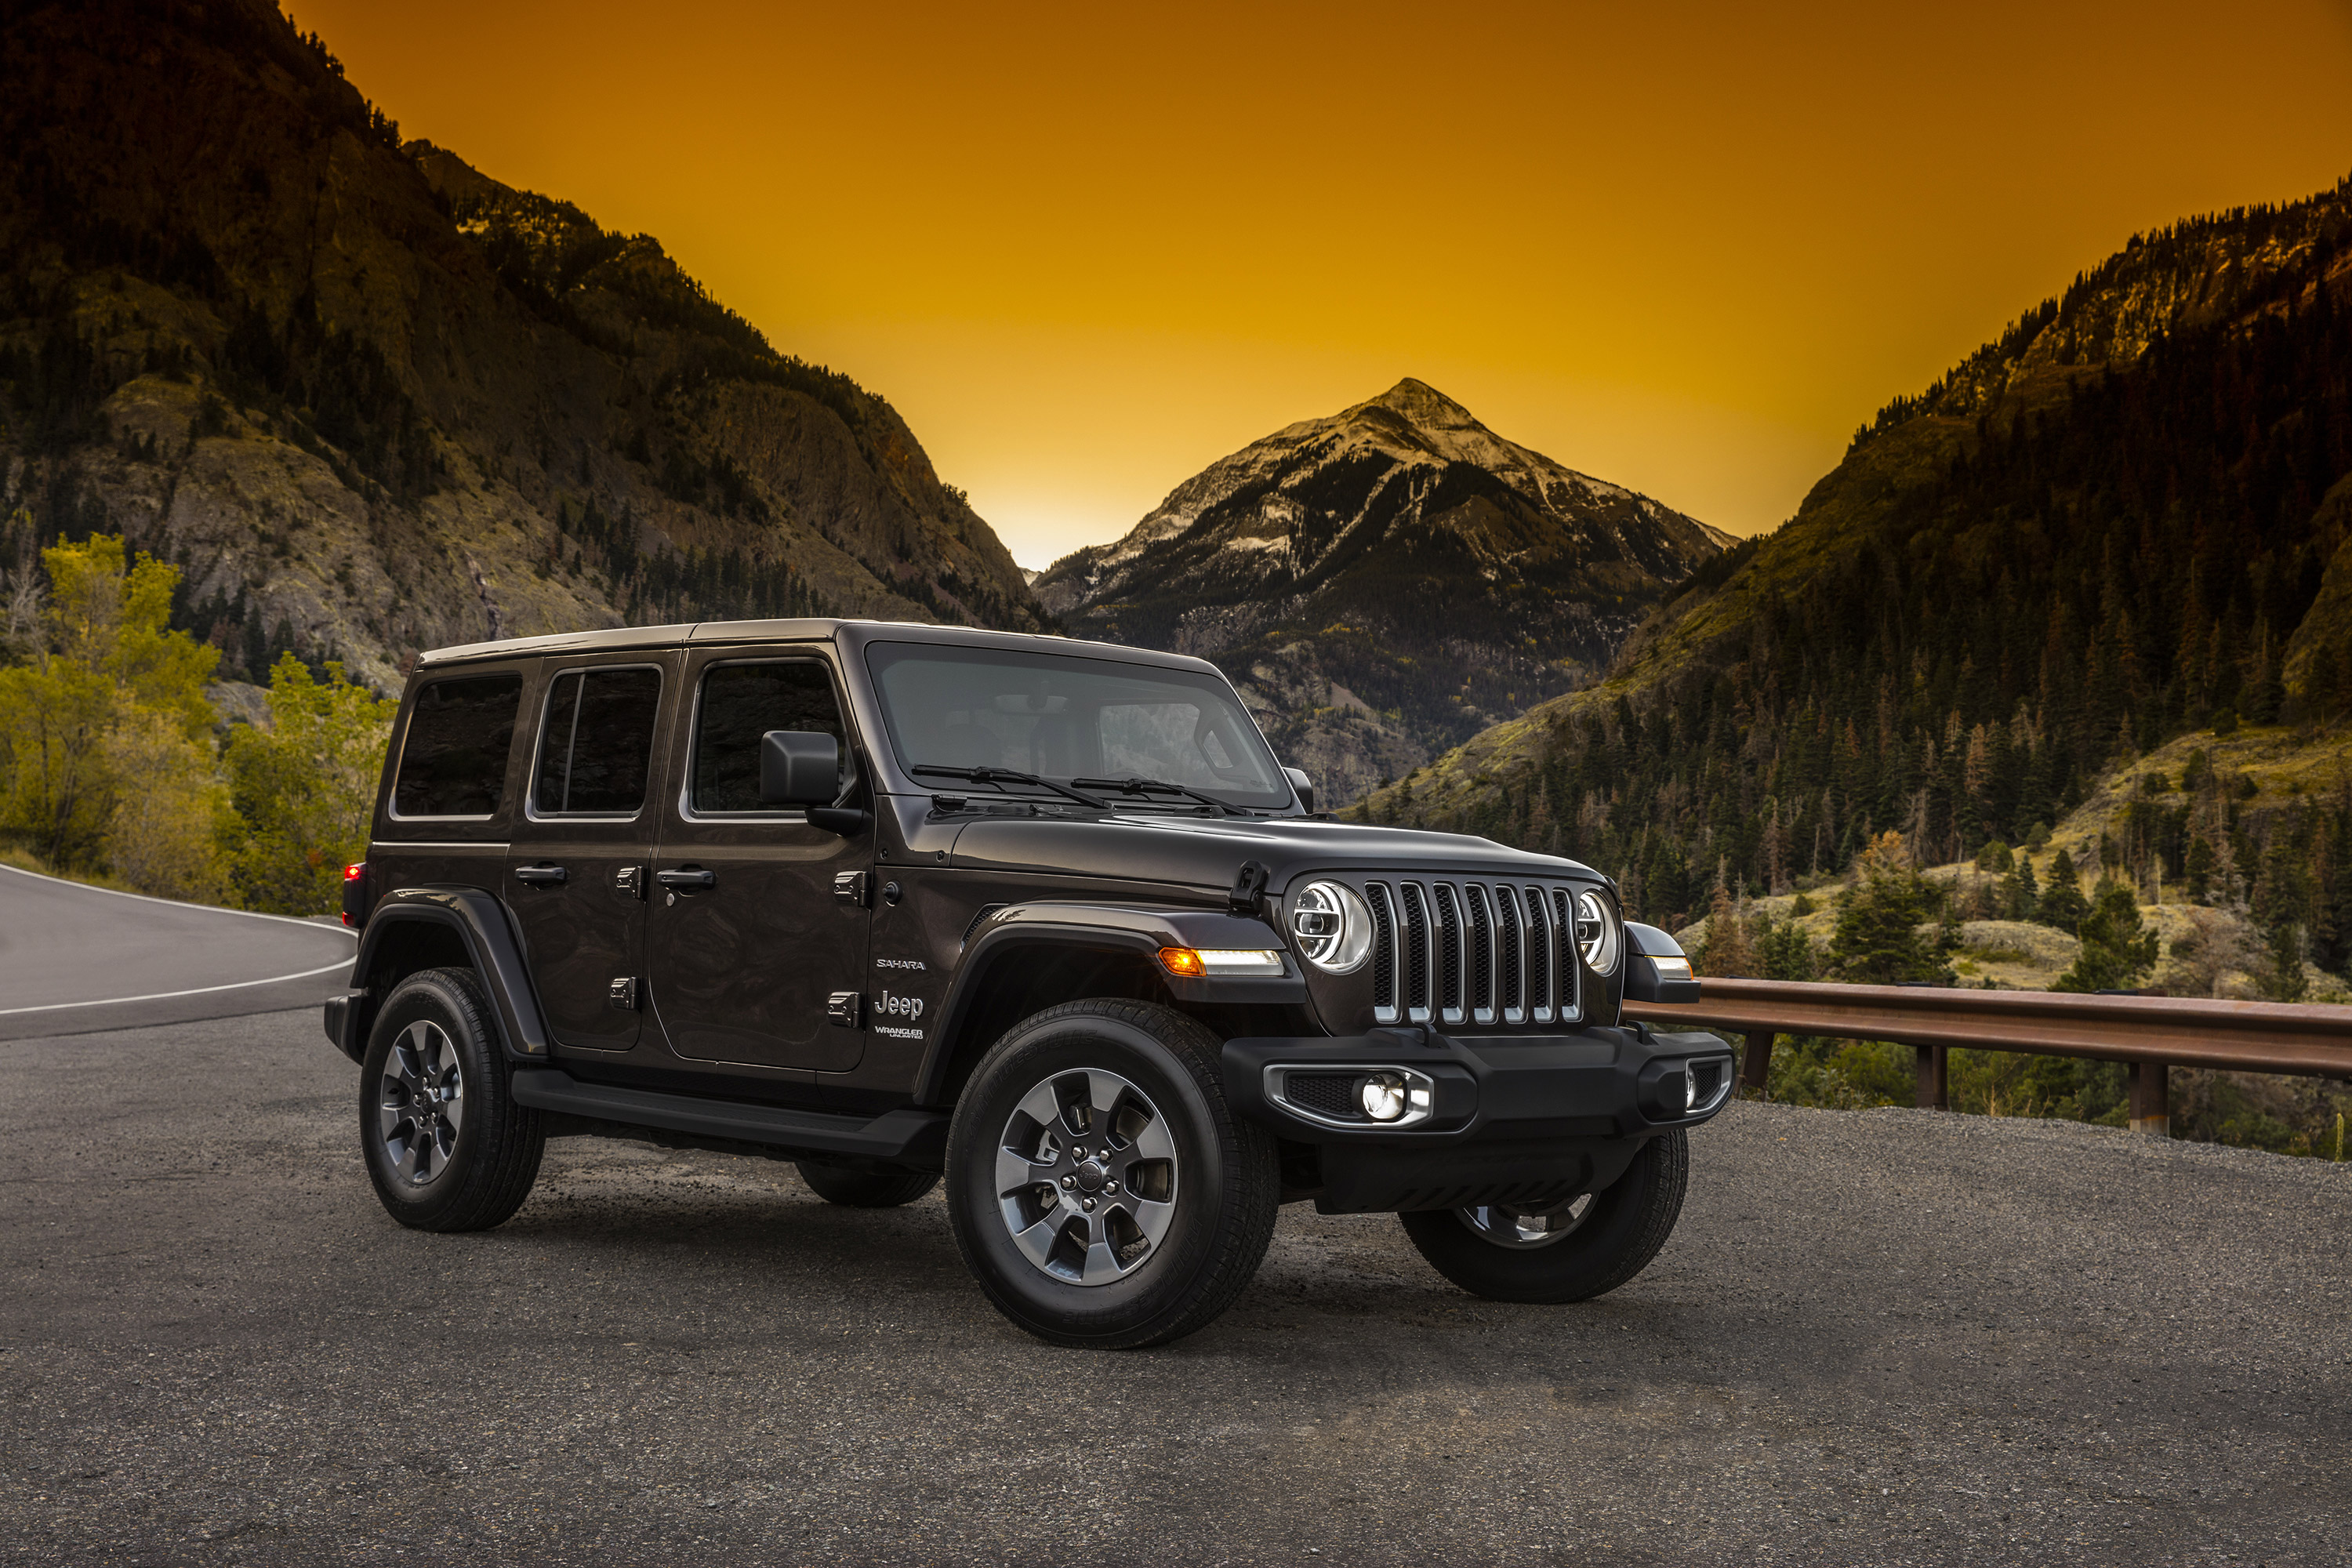 2018 Jeep Wrangler Unlimited Rubicon, HD Cars, 4k Wallpapers, Images